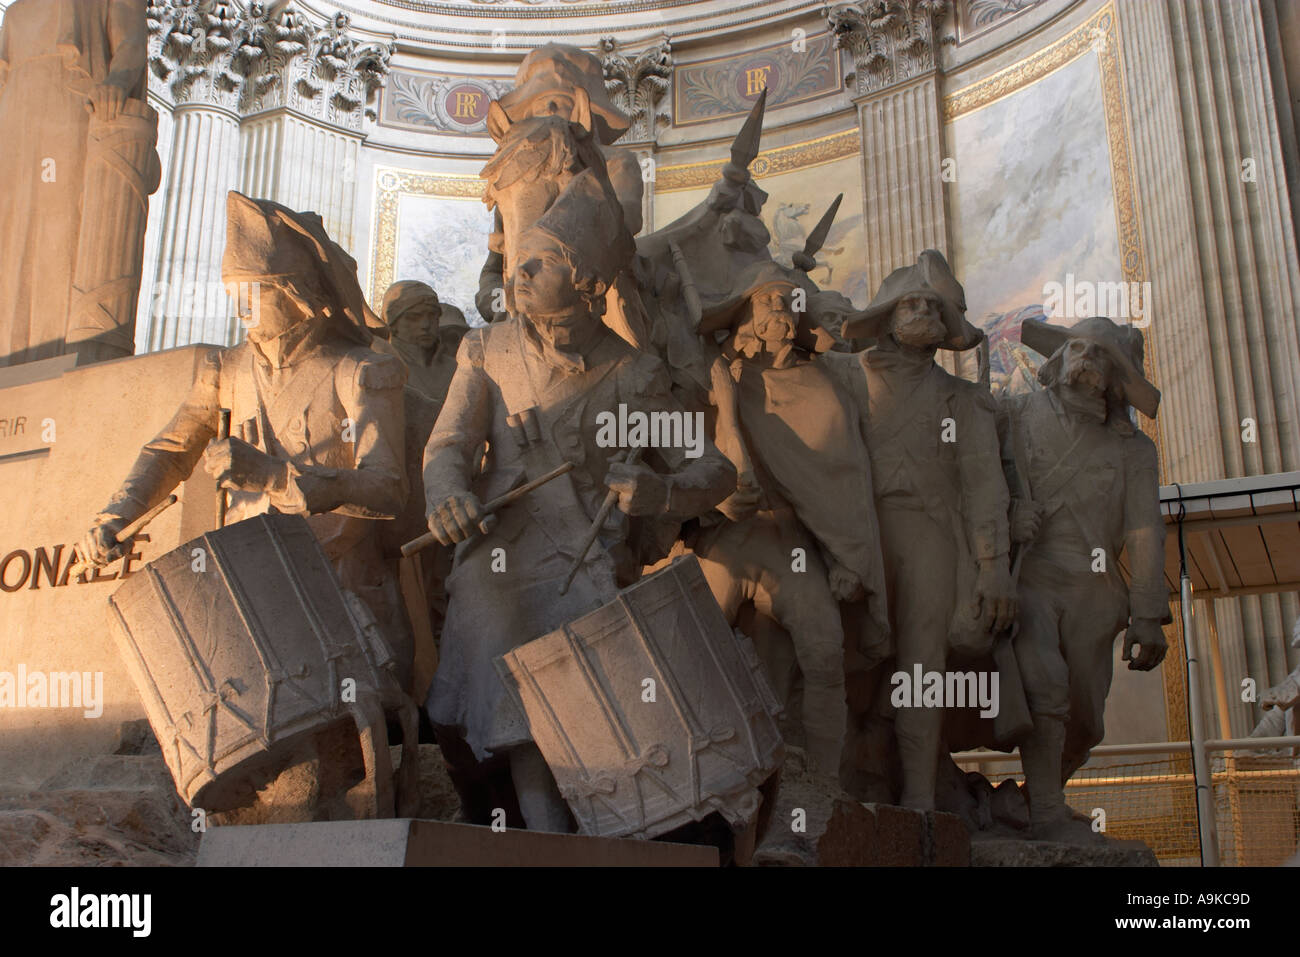 Detail from 'La Convention Nationale' statue by Sicard inside the Pantheon Paris France Stock Photo